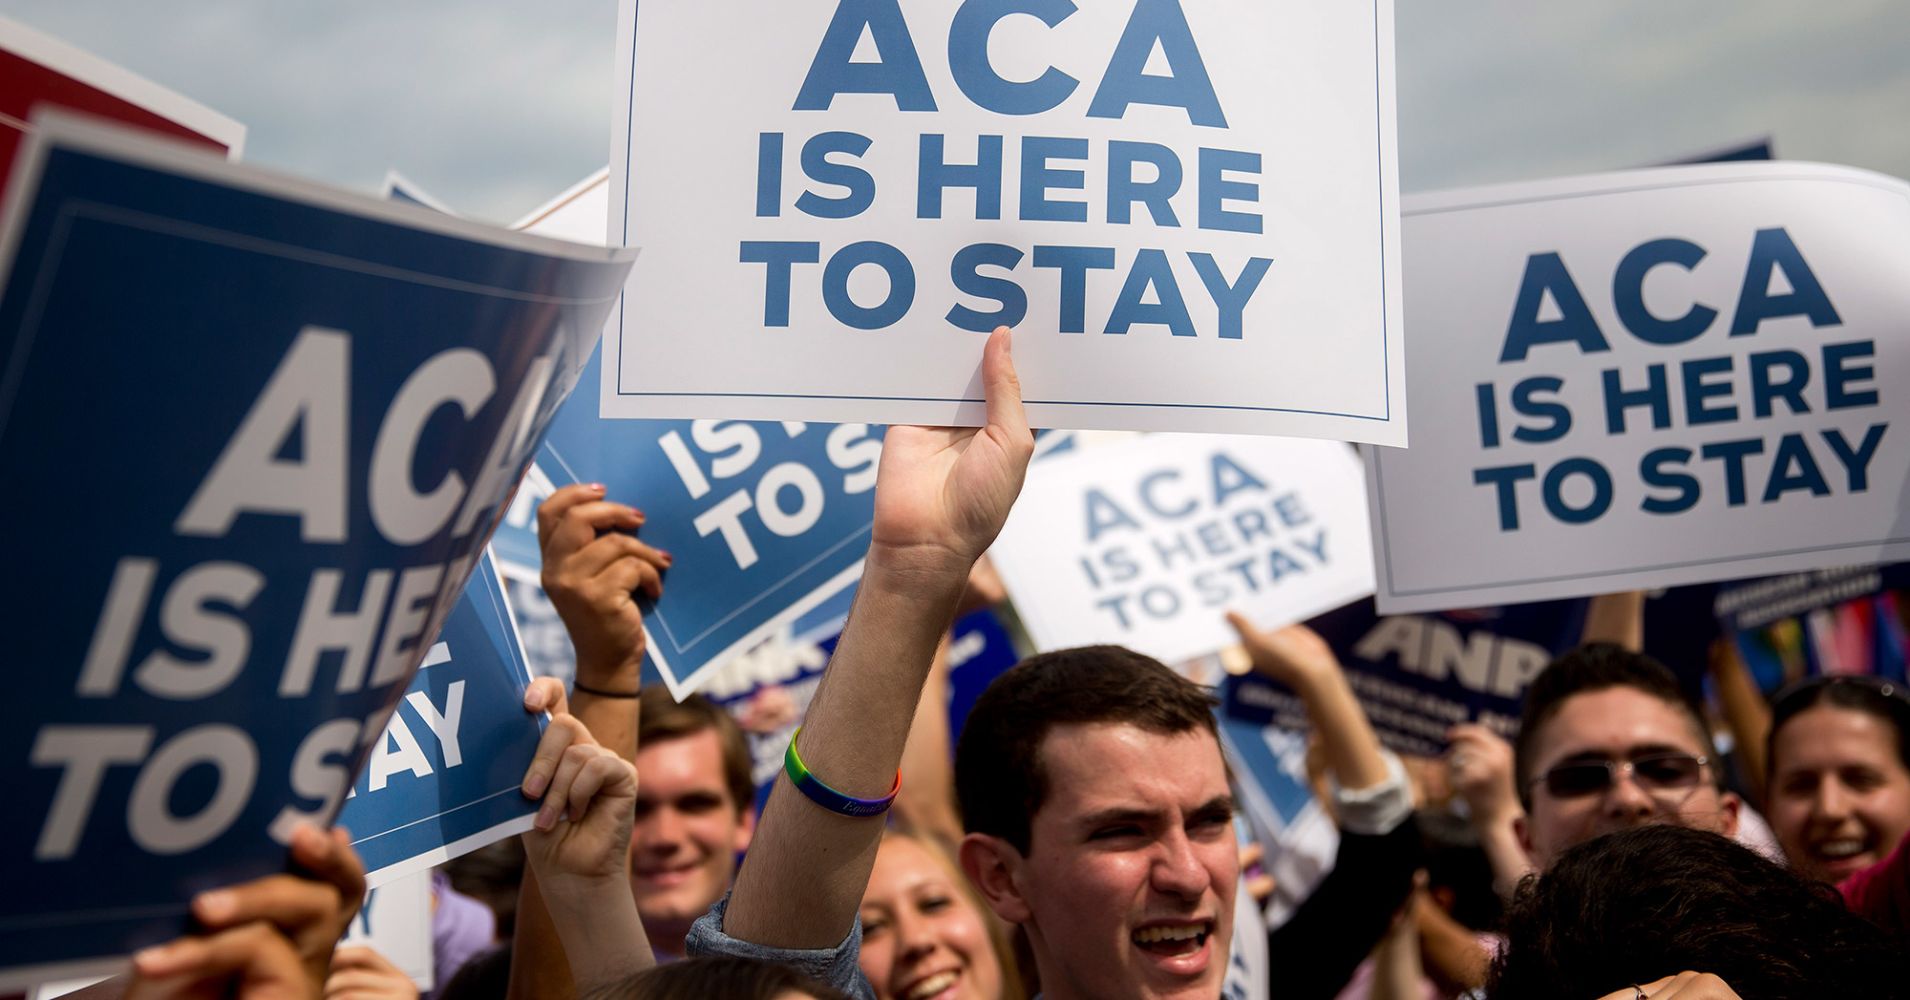 Demonstrators in support of U.S. President Barack Obama's health-care law, the Affordable Care Act (ACA), hold up 'ACA is Here to Stay' signs after the U.S. Supreme Court ruled 6-3 to save Obamacare tax subsidies outside the Supreme Court in Washington, D.C. June 25, 2015.